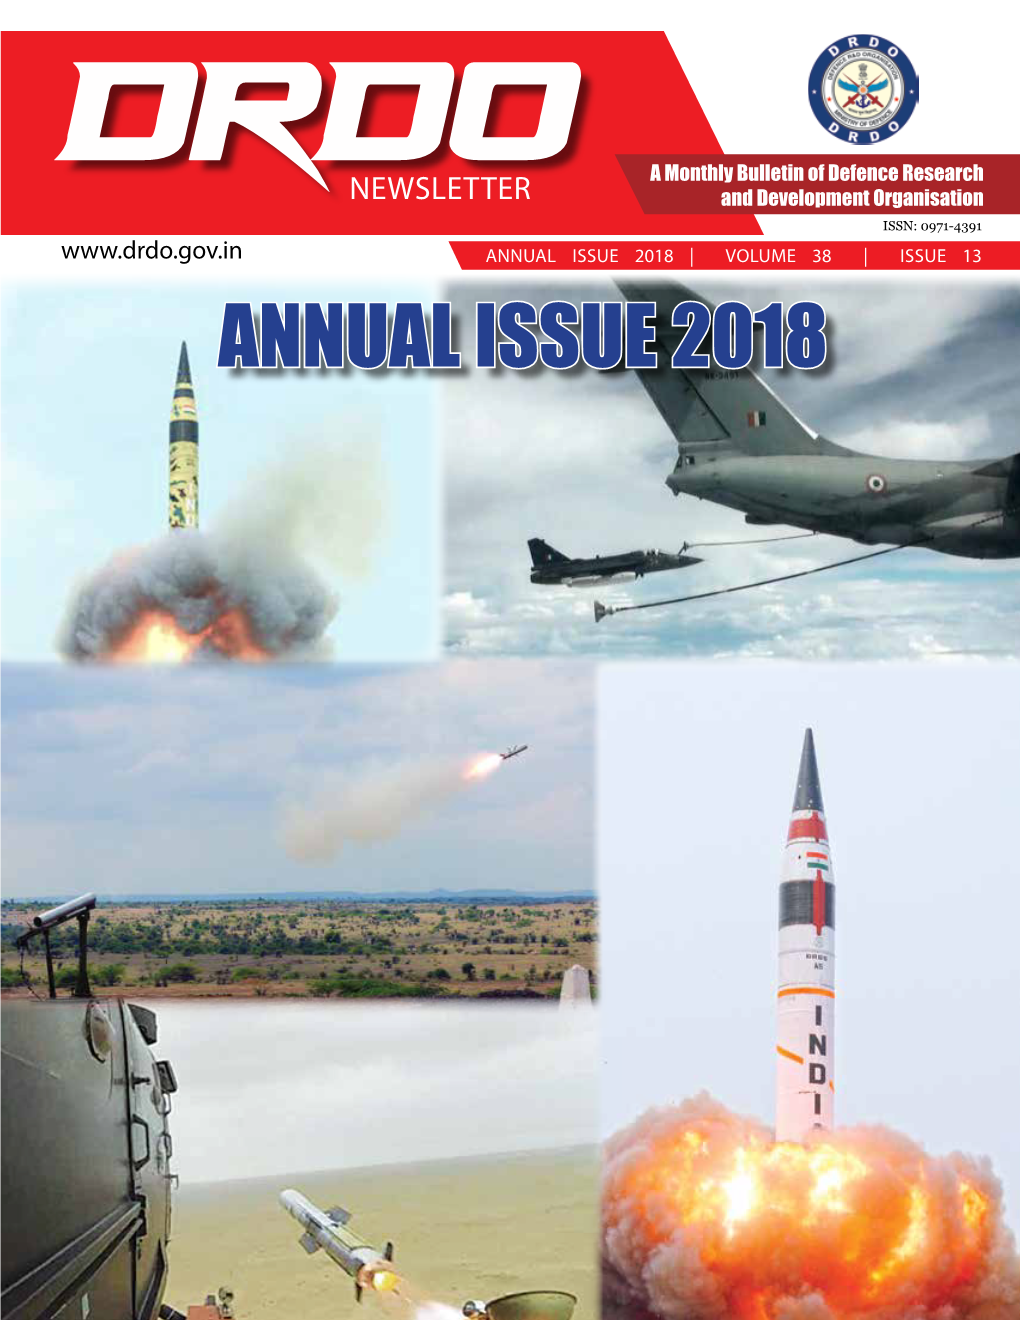 ANNUAL ISSUE 2018 | Volume 38 | Issue 13 ANNUAL ISSUE 2018 DRDO Newsletter